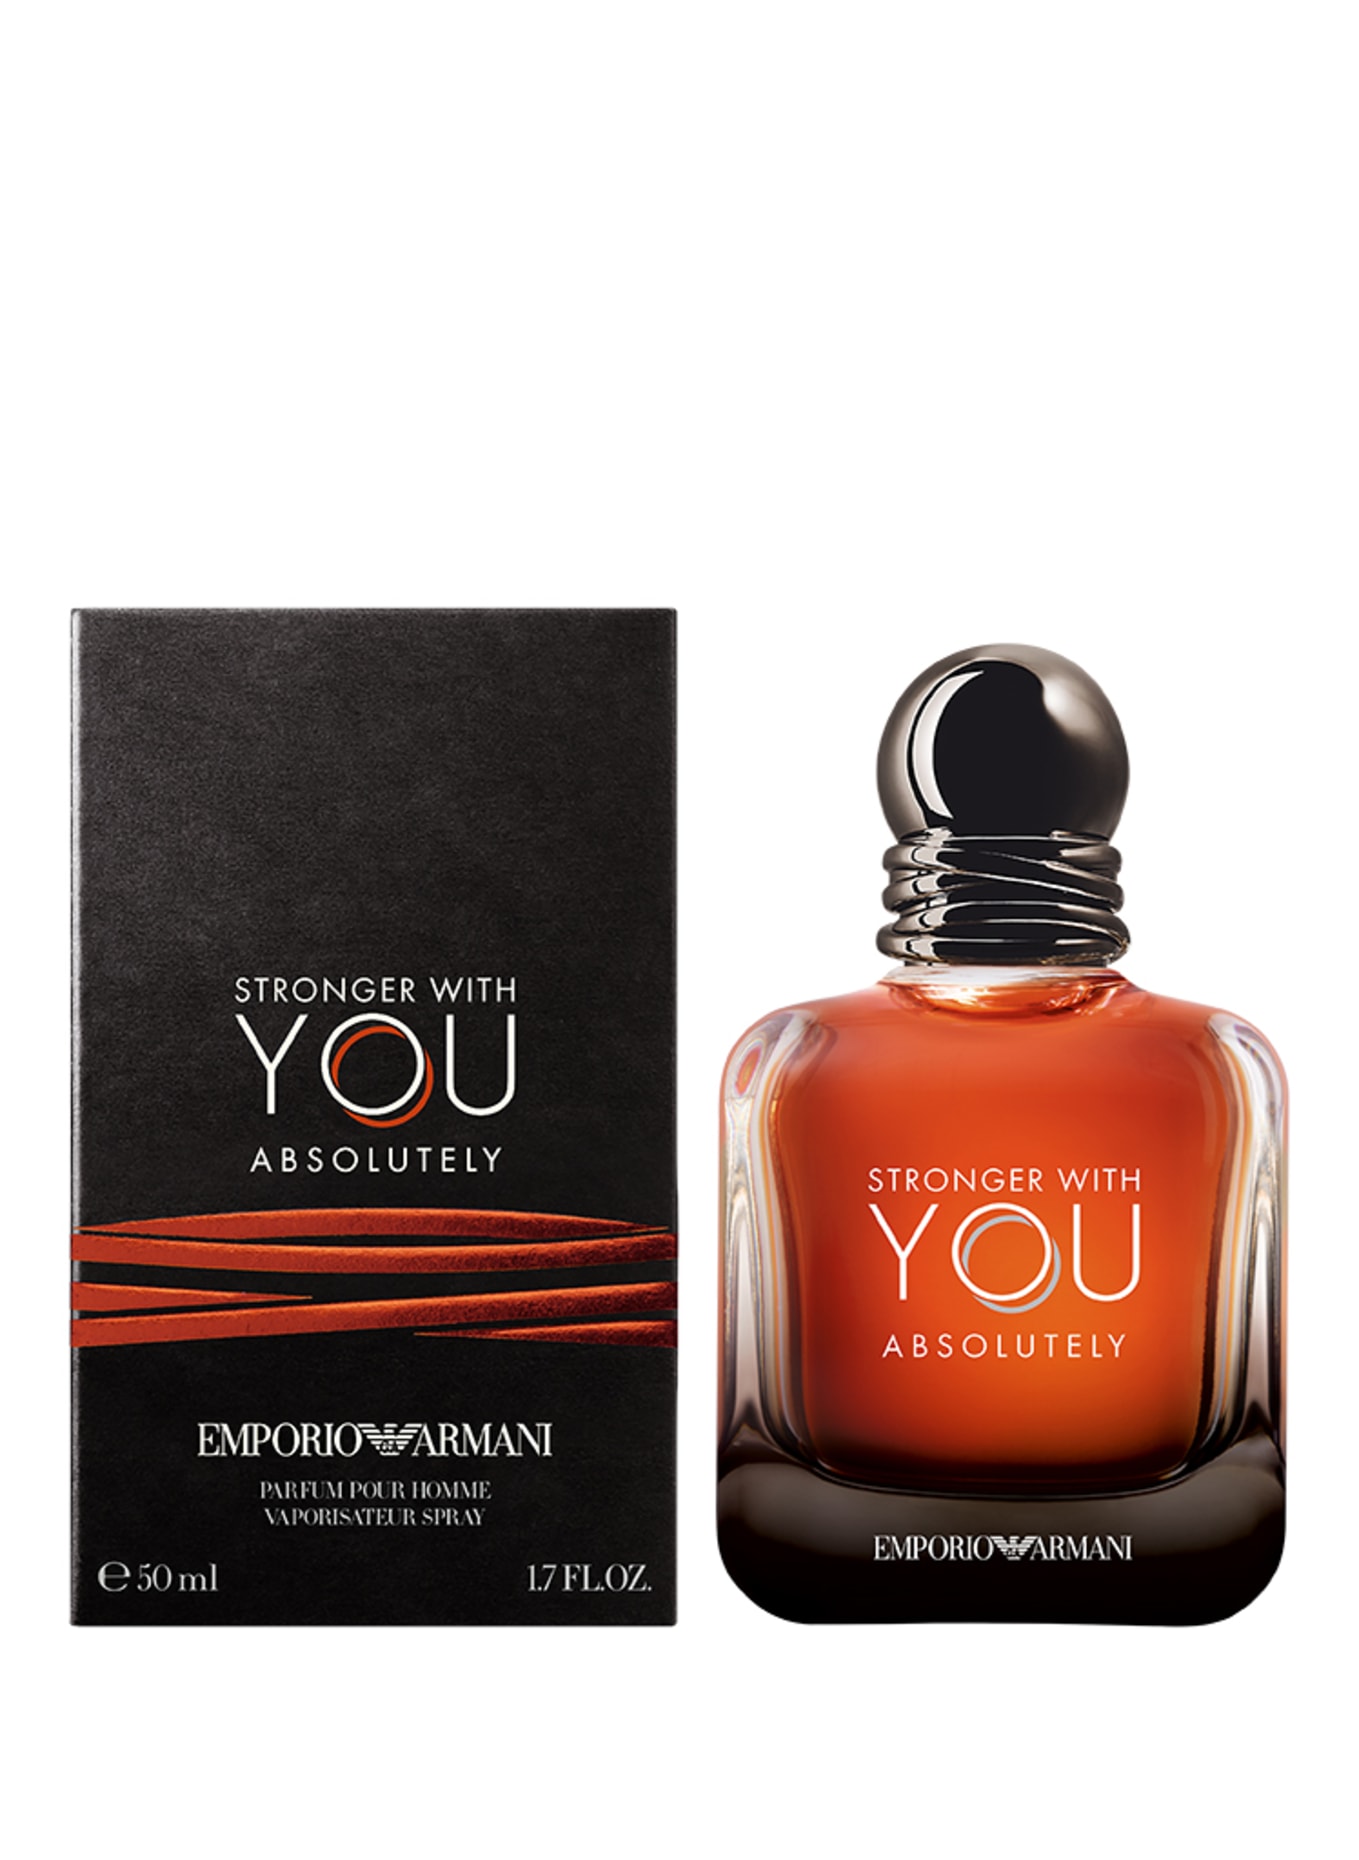 EMPORIO ARMANI STRONGER WITH YOU ABSOLUTELY (Obrazek 2)